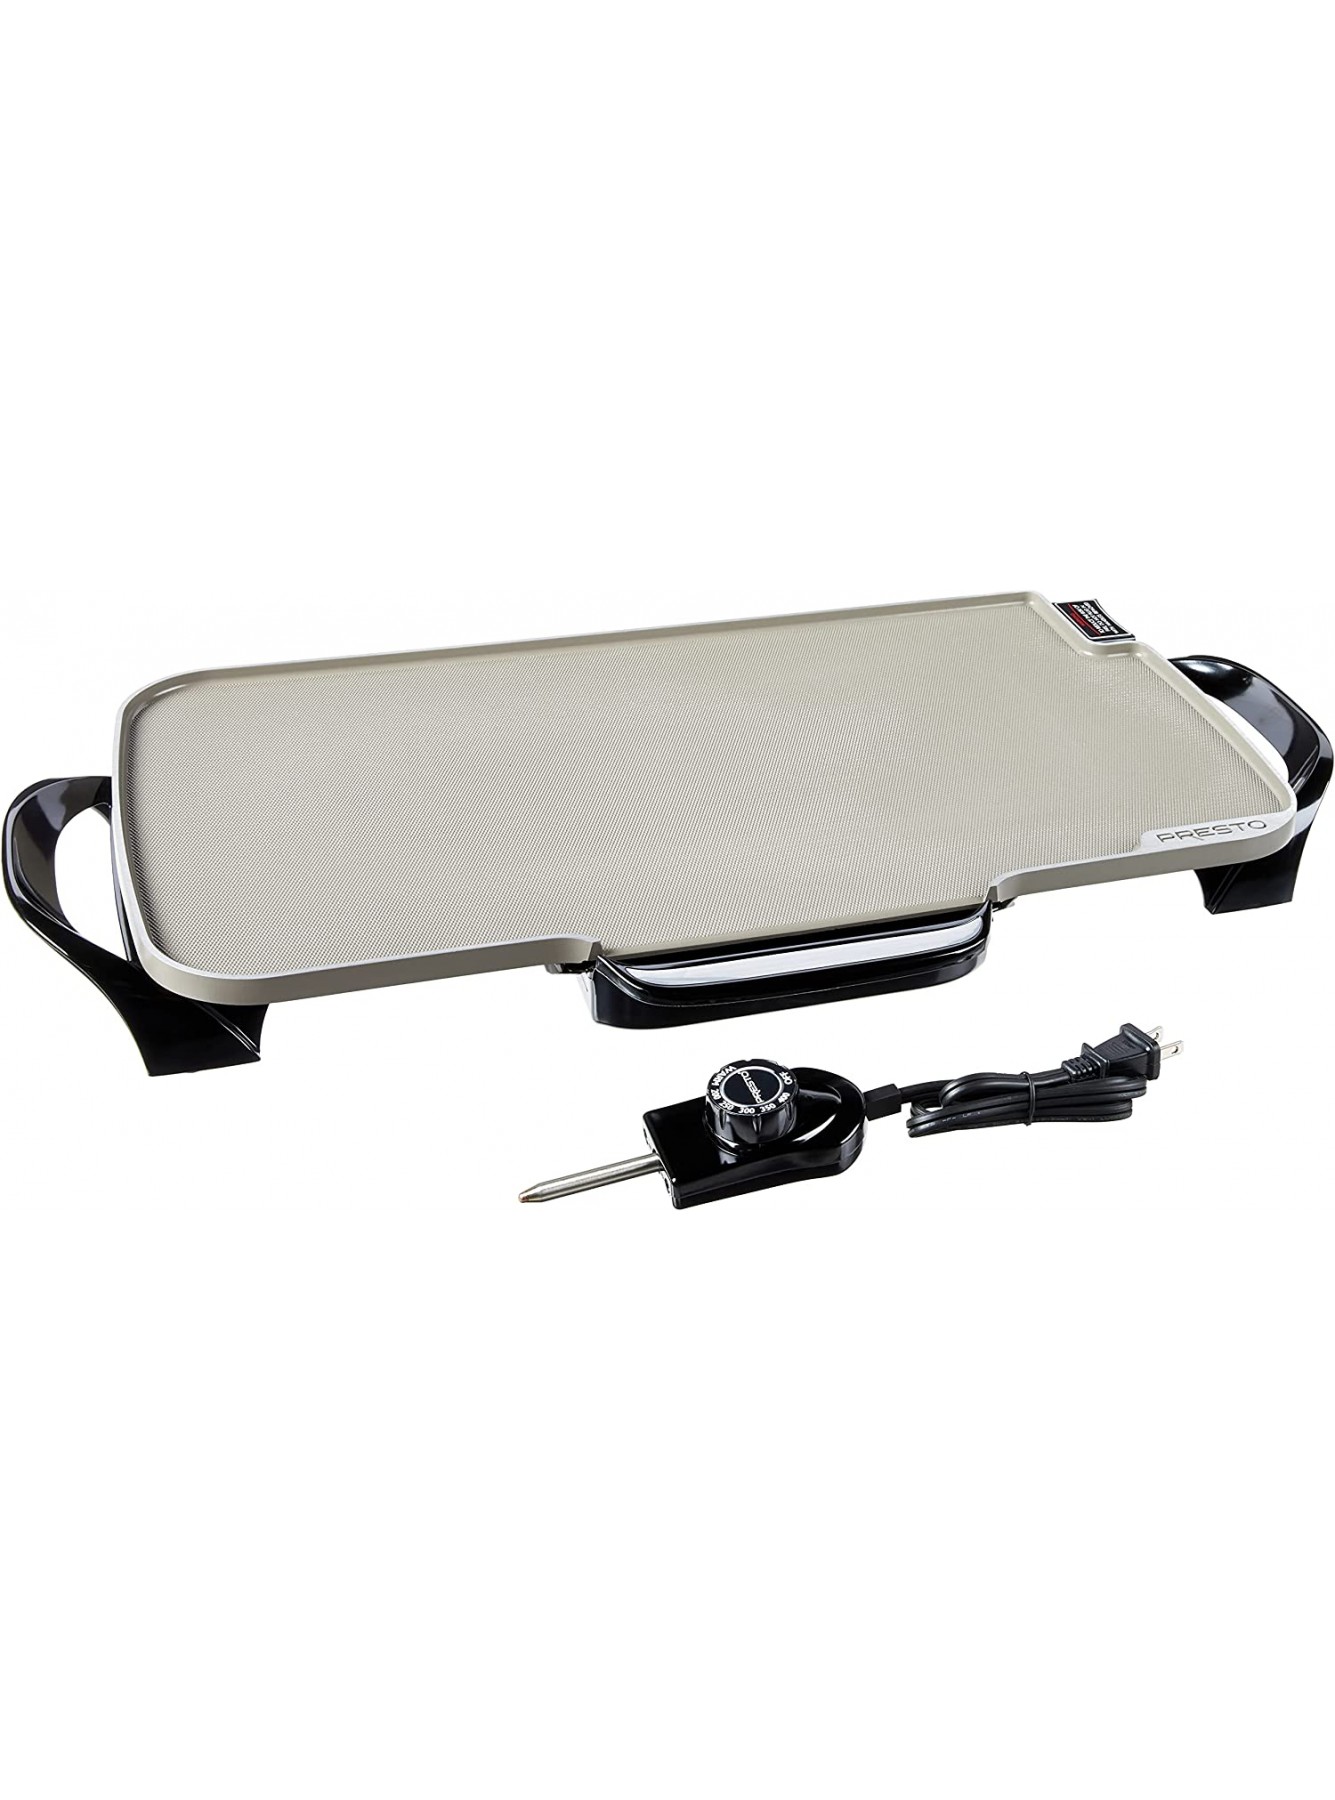 Presto Ceramic 22-inch 07062 Electric Griddle with removable handles Black One Size B01G7DM7X6